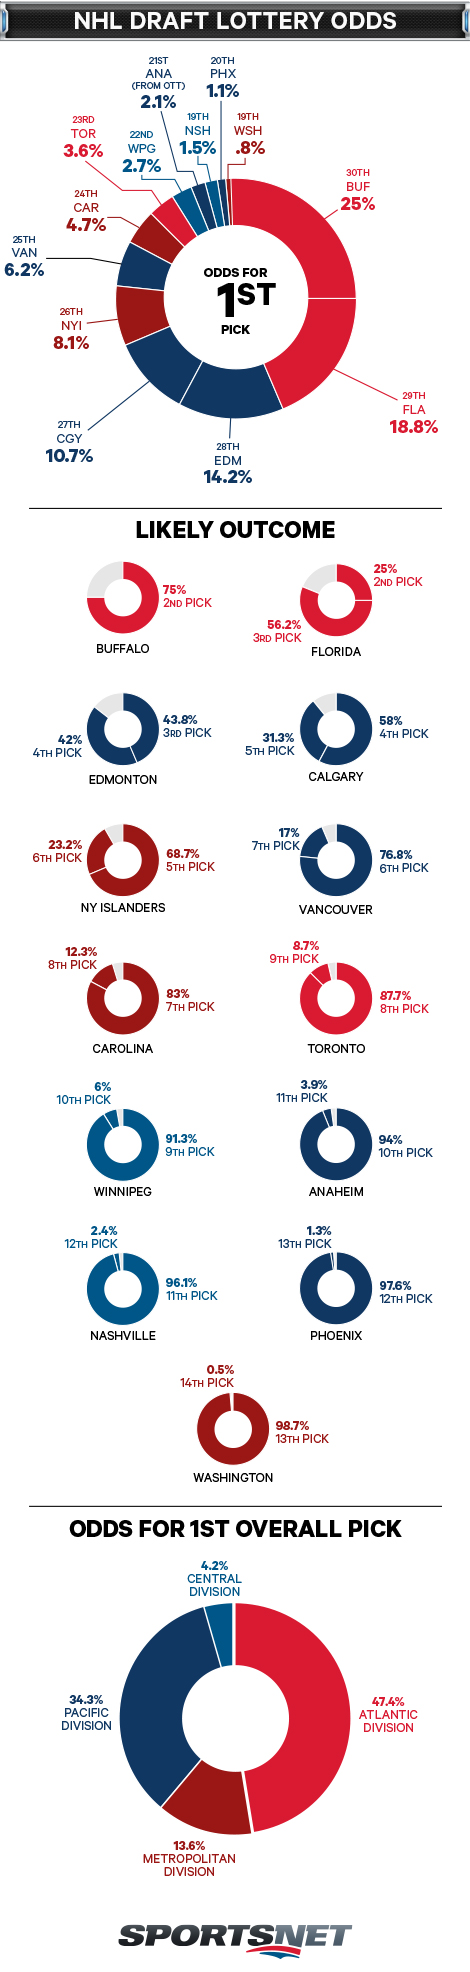 2014 NHL draft lottery odds for No. 1 